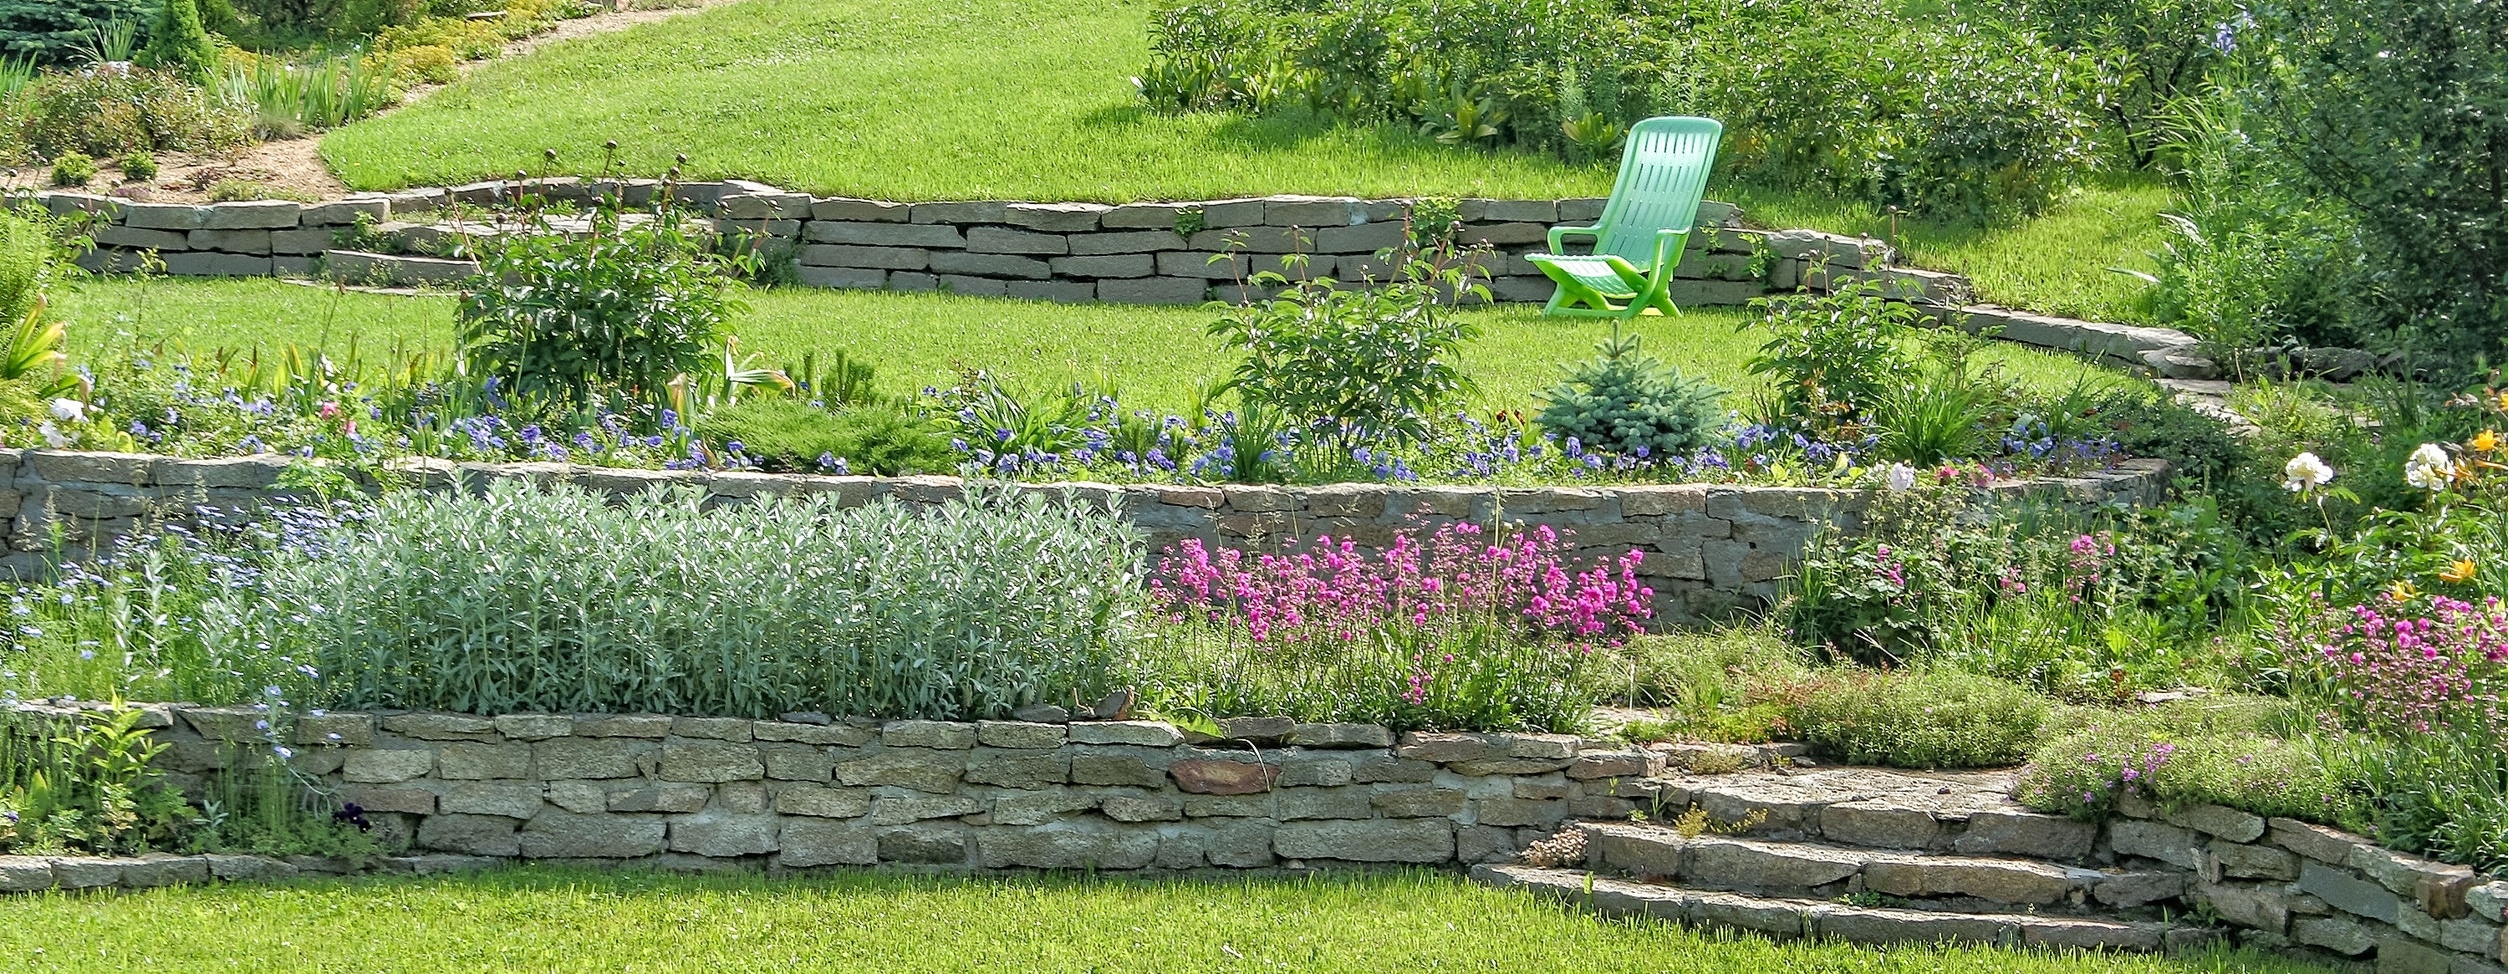 Lawn with retaining walls